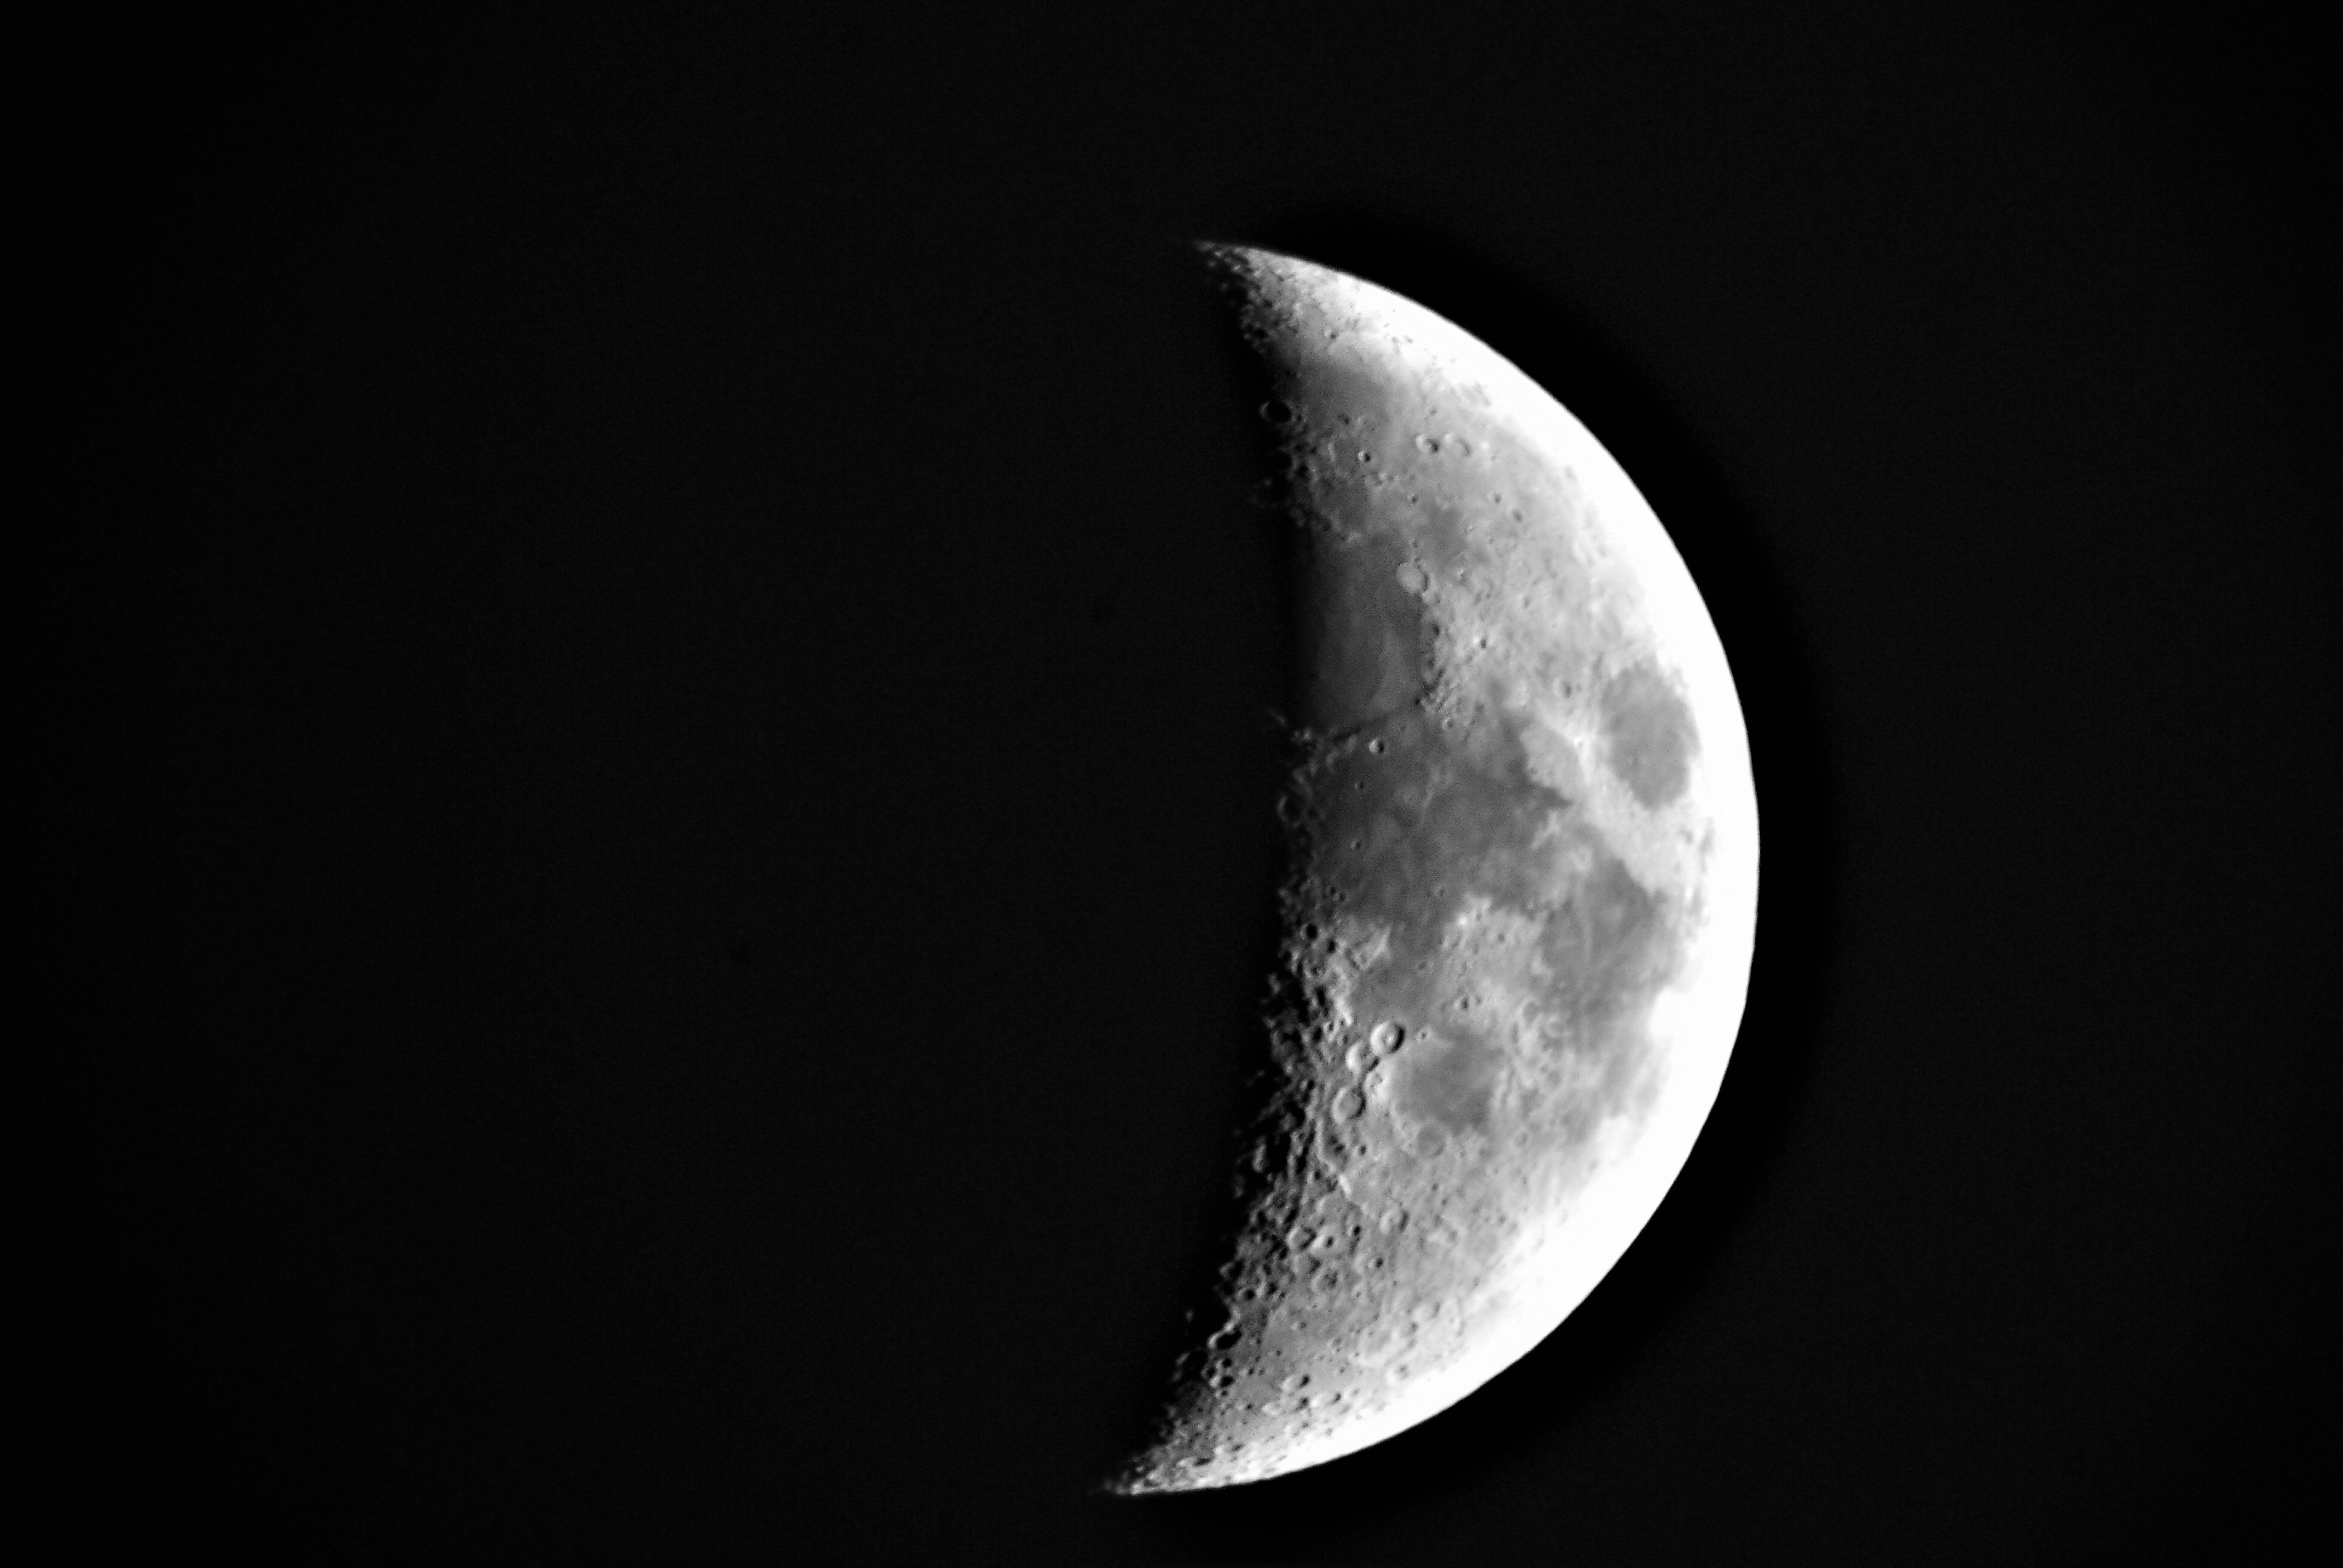 Three nights in a row and yet another shot of the moon, by Bill Samson. A bit etter this time because I used the T-mount thread at the back of the telescope rather than the wobbly 1 1/4" adapter where everything's a bit off-centre. 21 04 2018 20:04UT, Skywatcher Skymax 102, Sony A330, 1/20 sec f13.